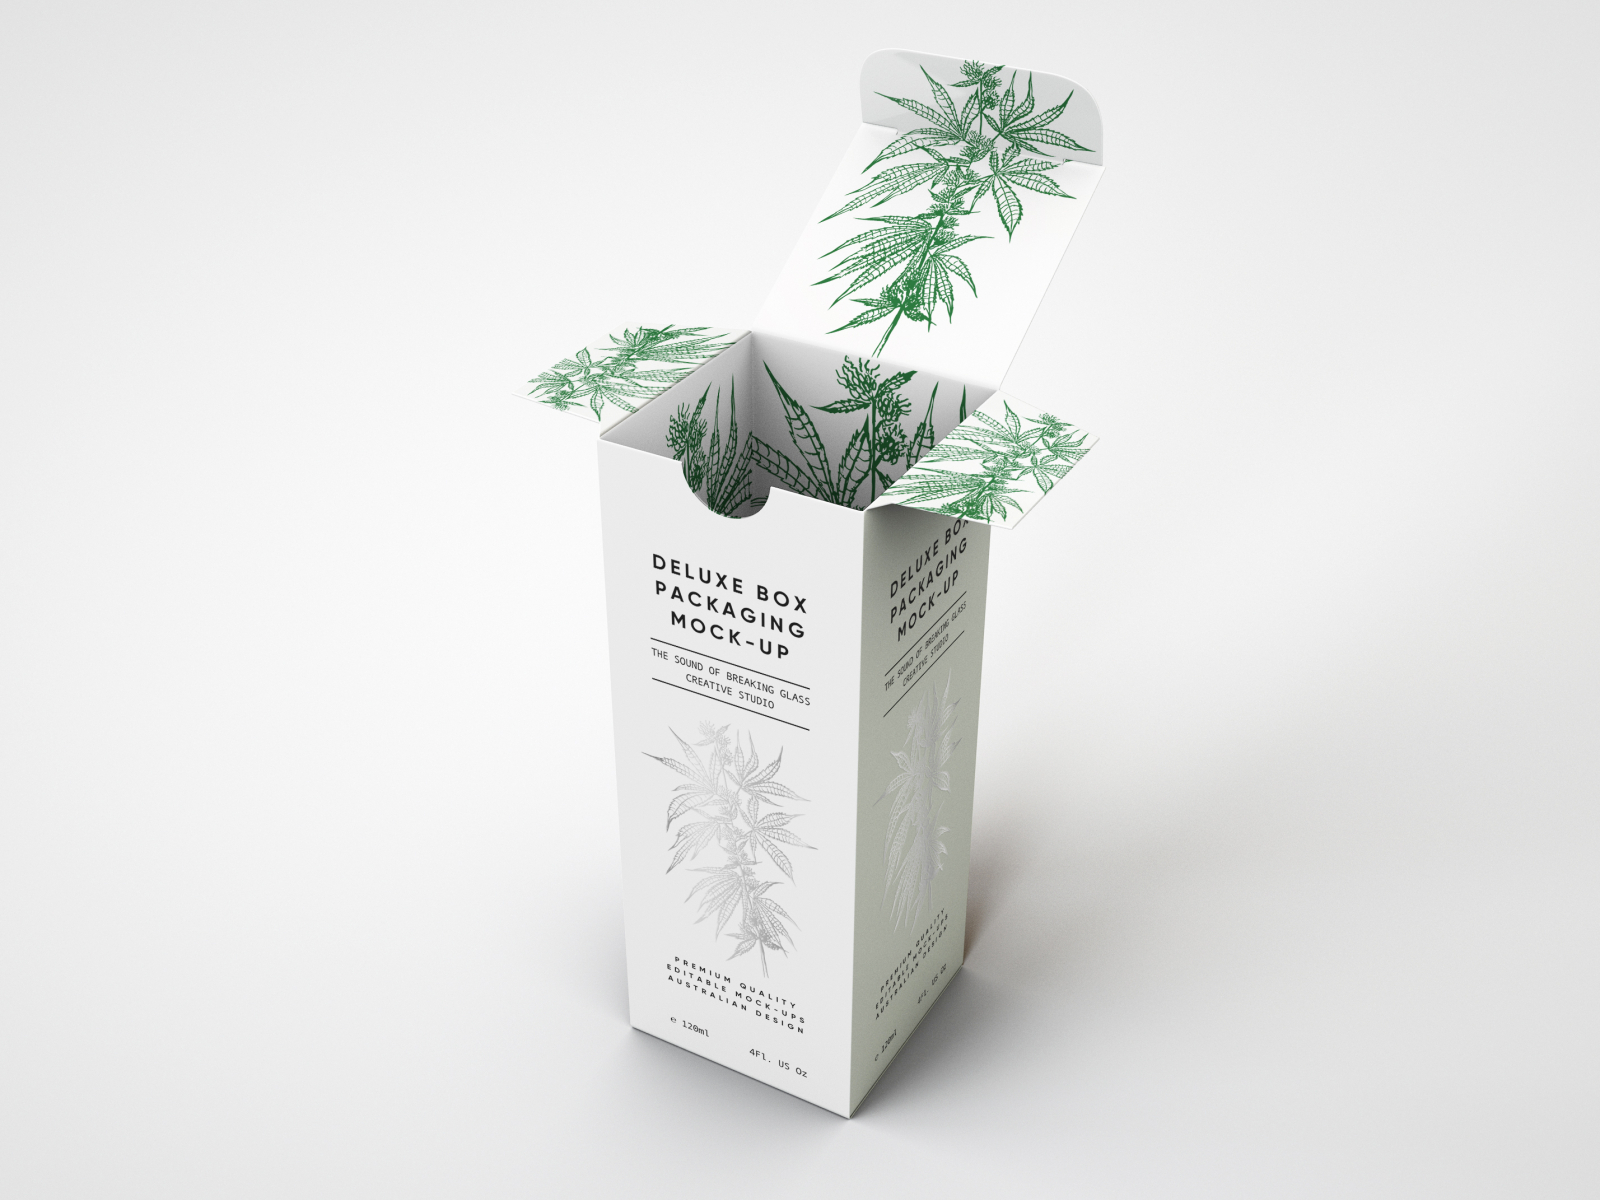 Download Deluxe Paper Box Packaging Mock Up By Joshua On Dribbble